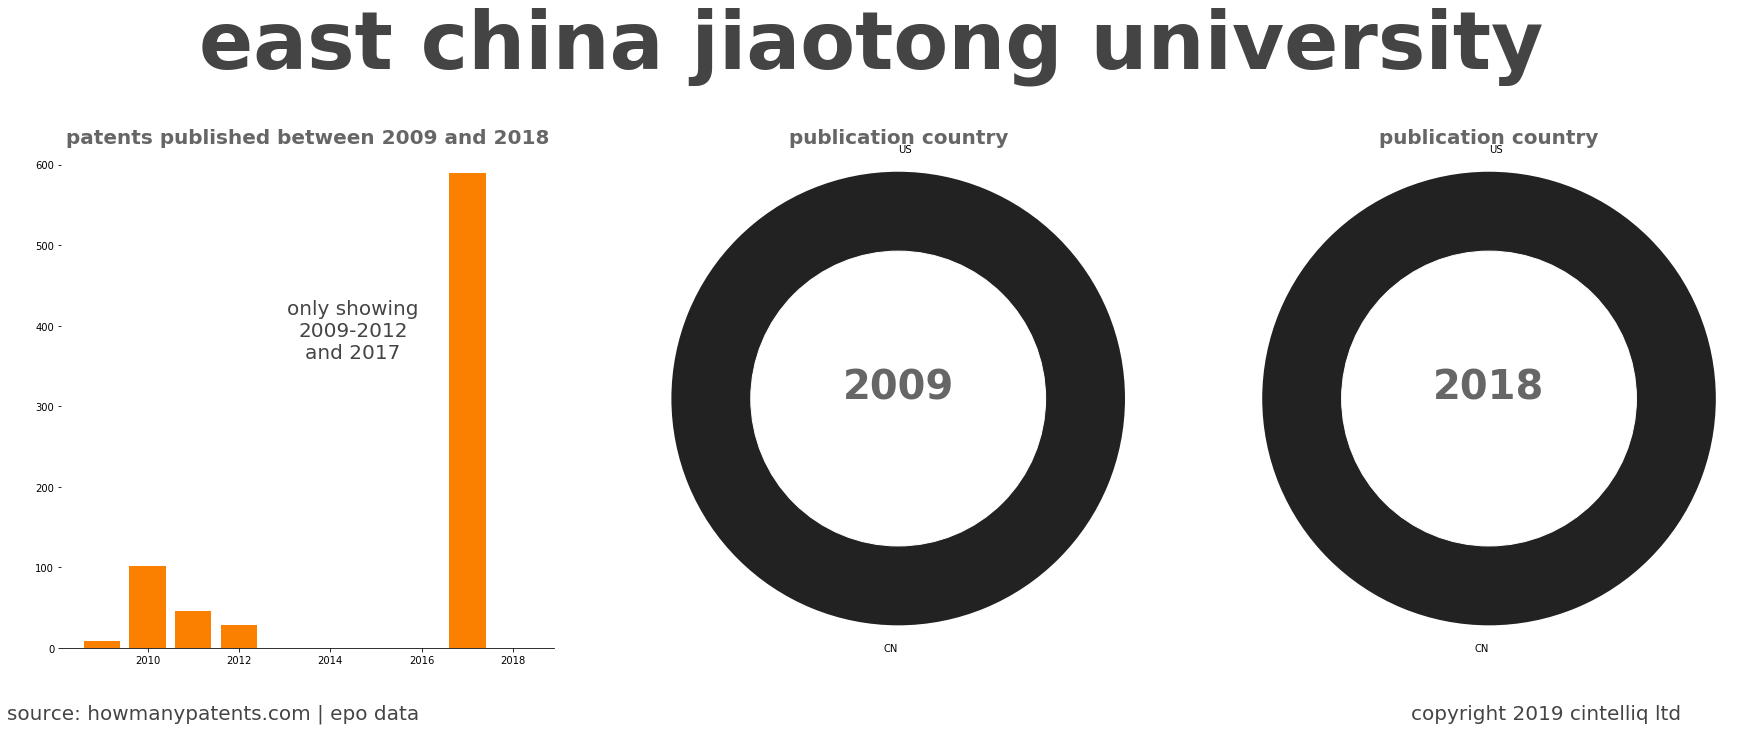 summary of patents for East China Jiaotong University